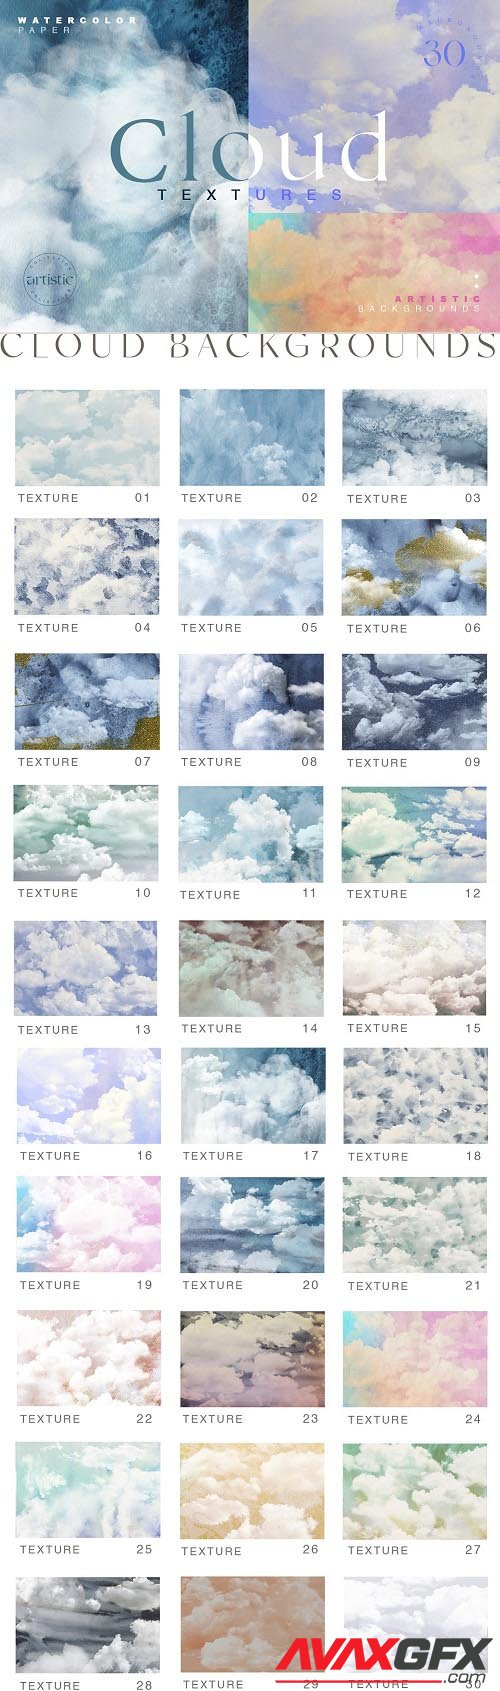 Cloudy Watercolor Abstract Textures - 6561479